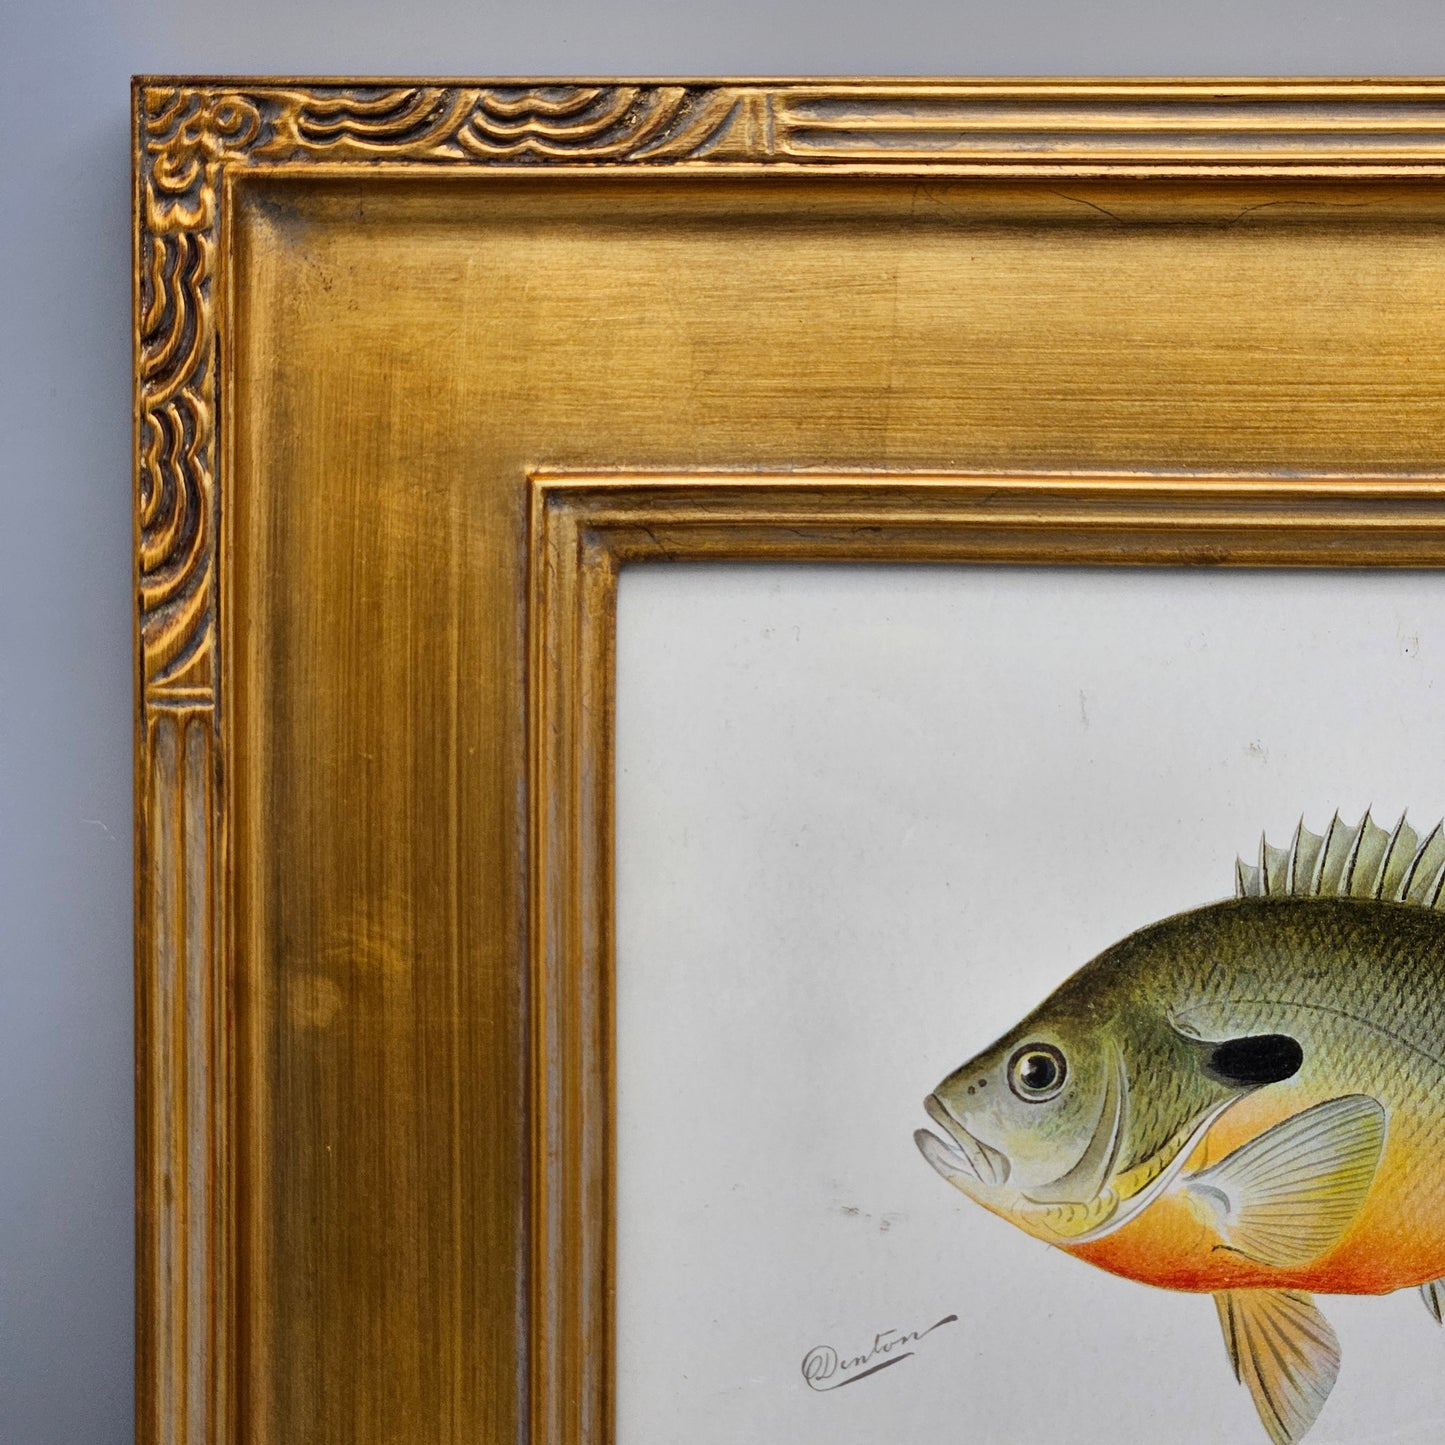 Antique Long Eared Sunfish Framed Hand Painted Fish Lithograph